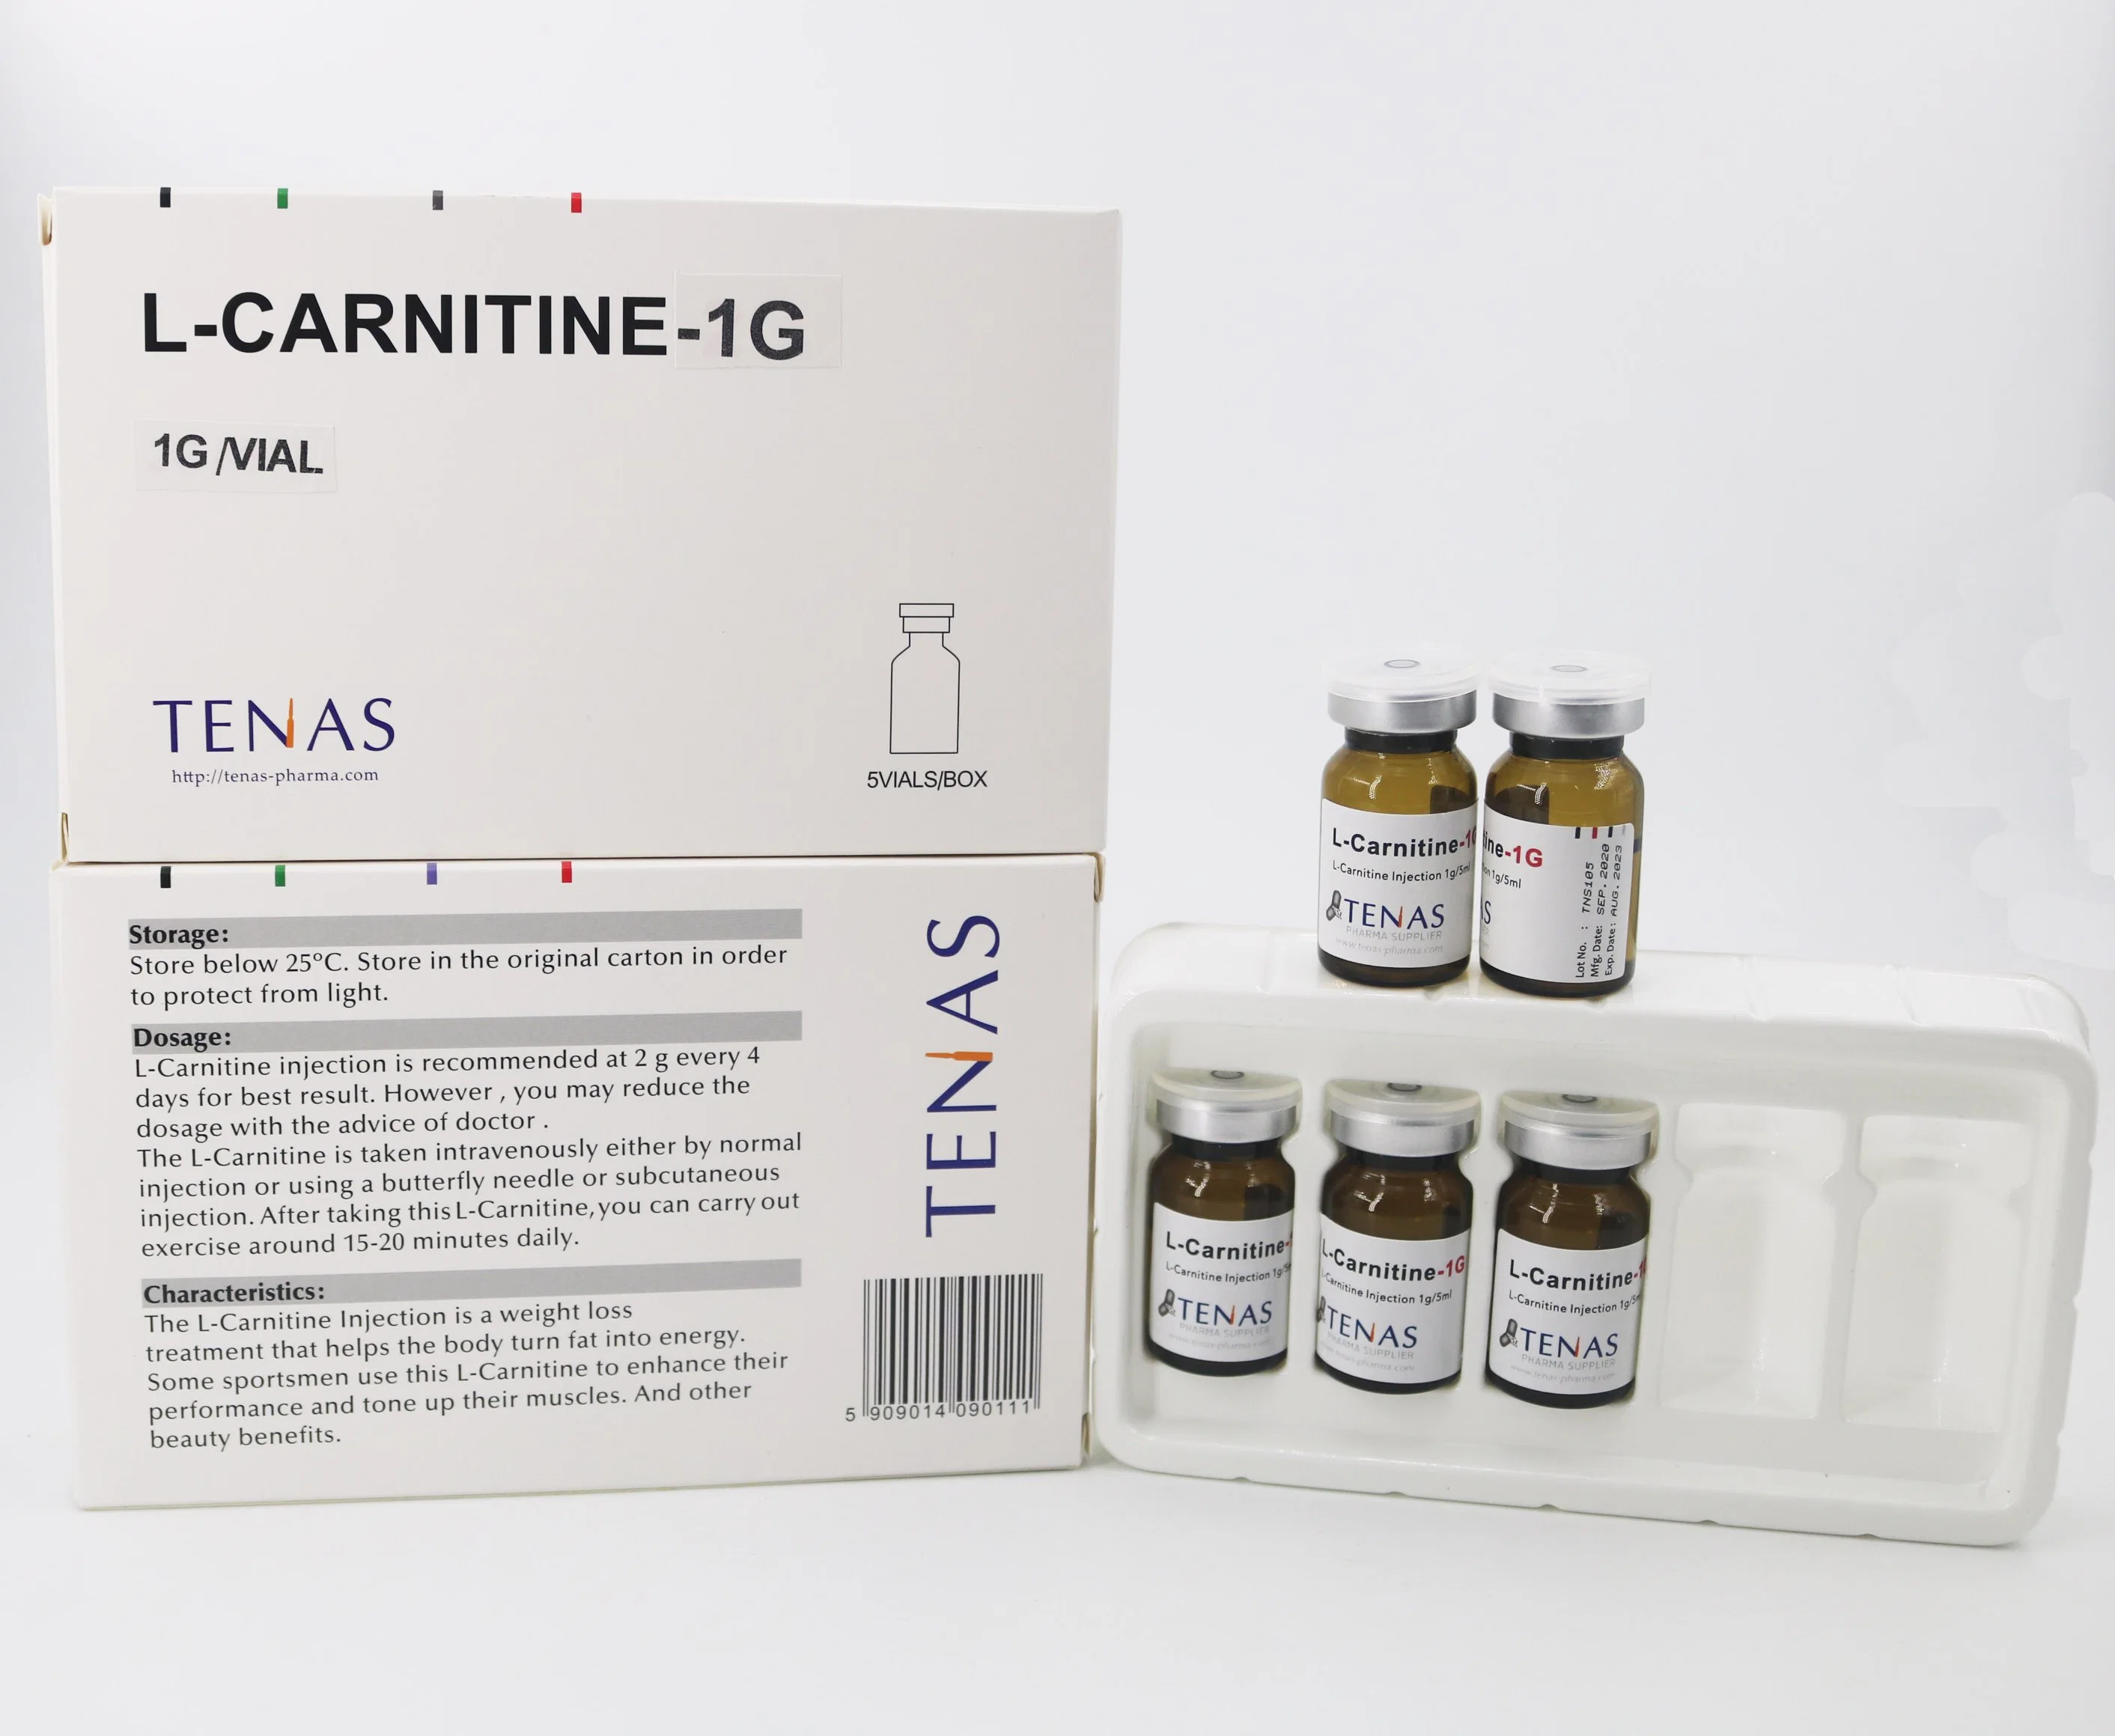 L- Carnitine Liquid Injection Is Used for Bodybuilding, Reducing Fat and Weight Loss